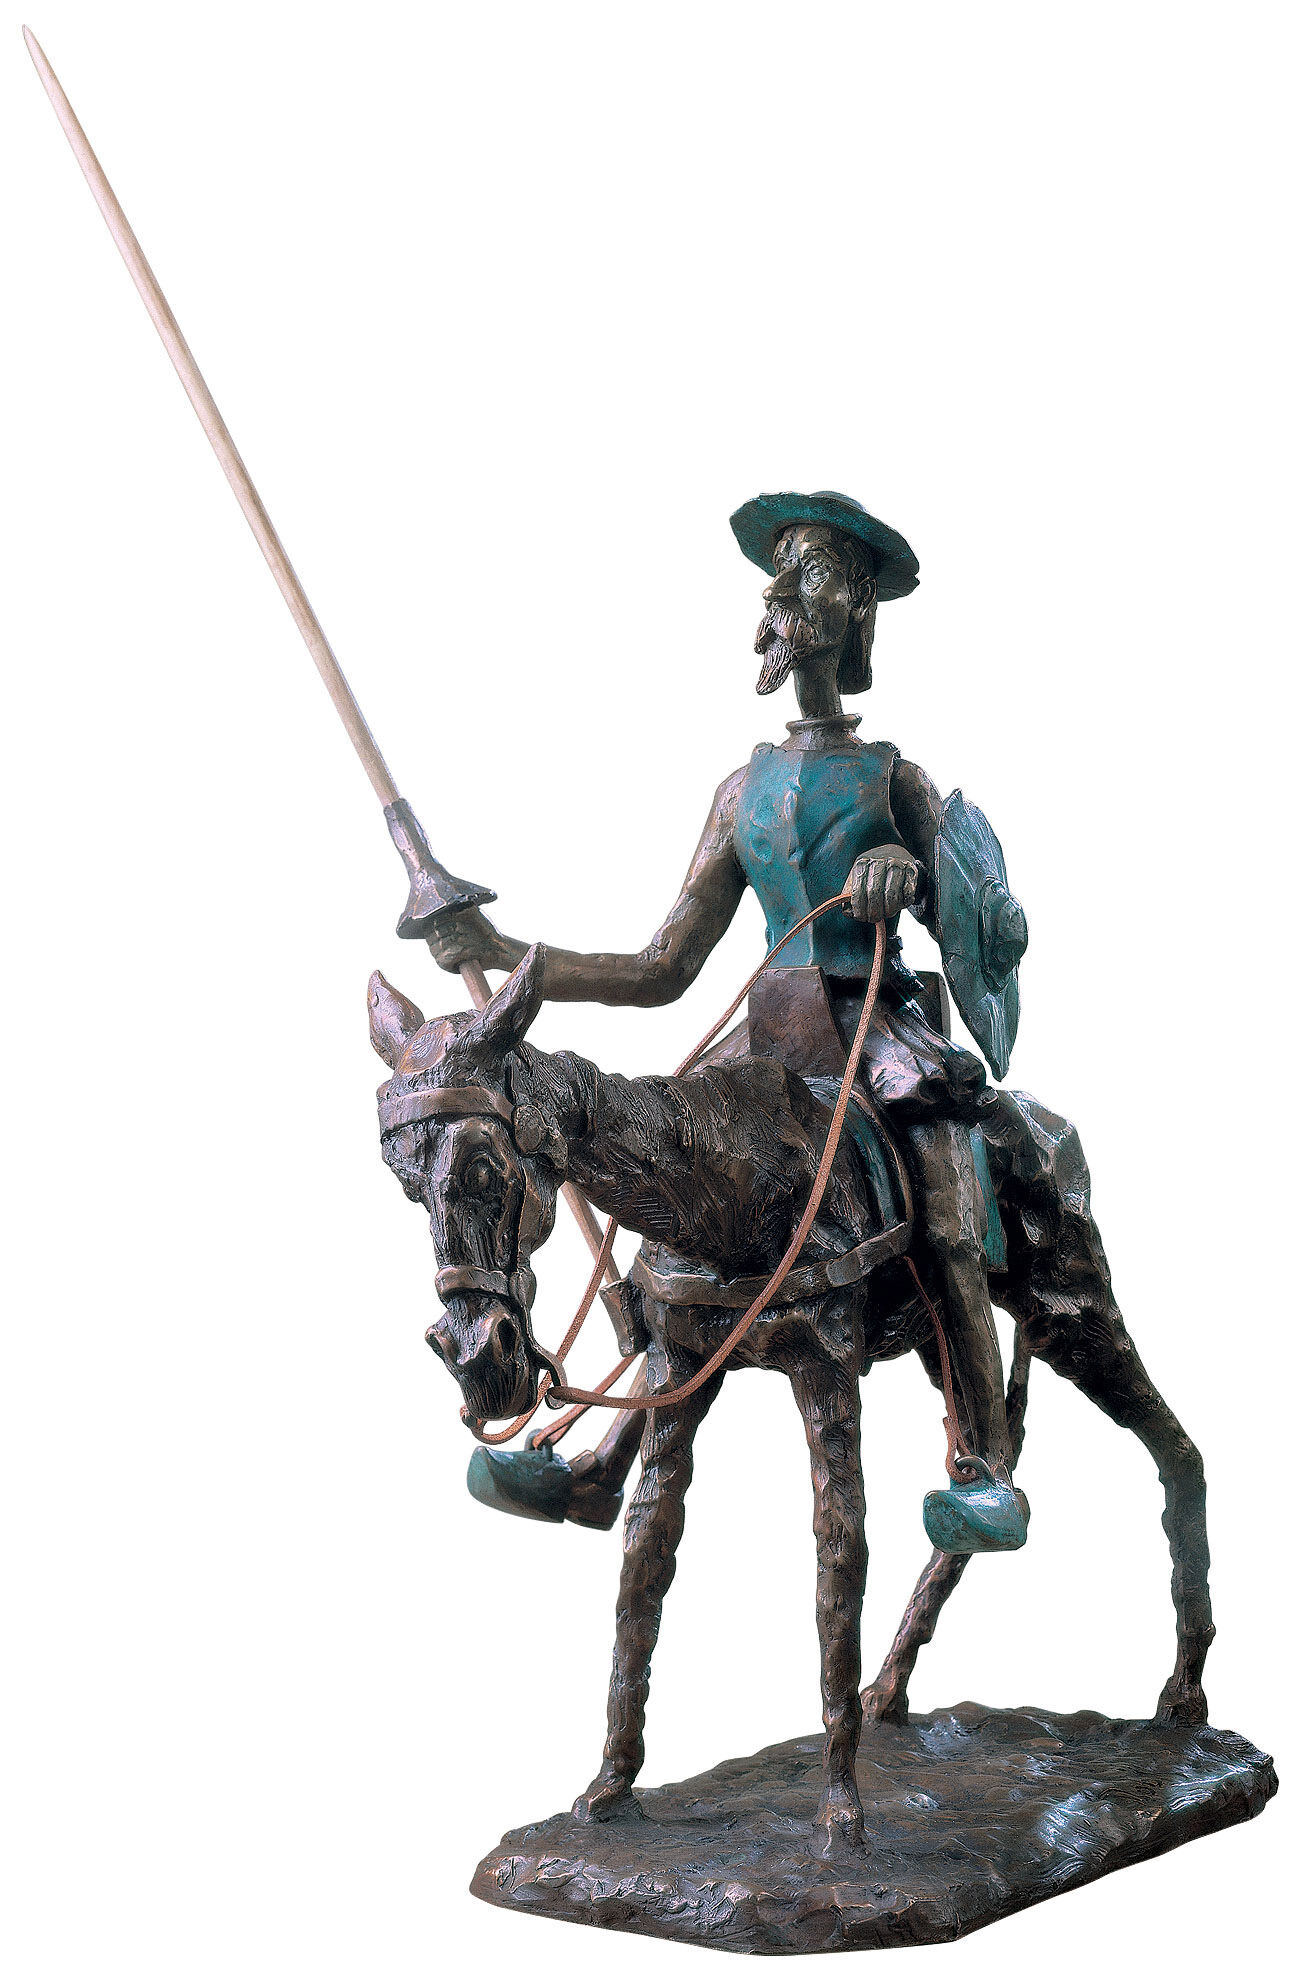 Sculpture "Don Quixote, the Knight of the Woeful Countenance", bronze by RobiN